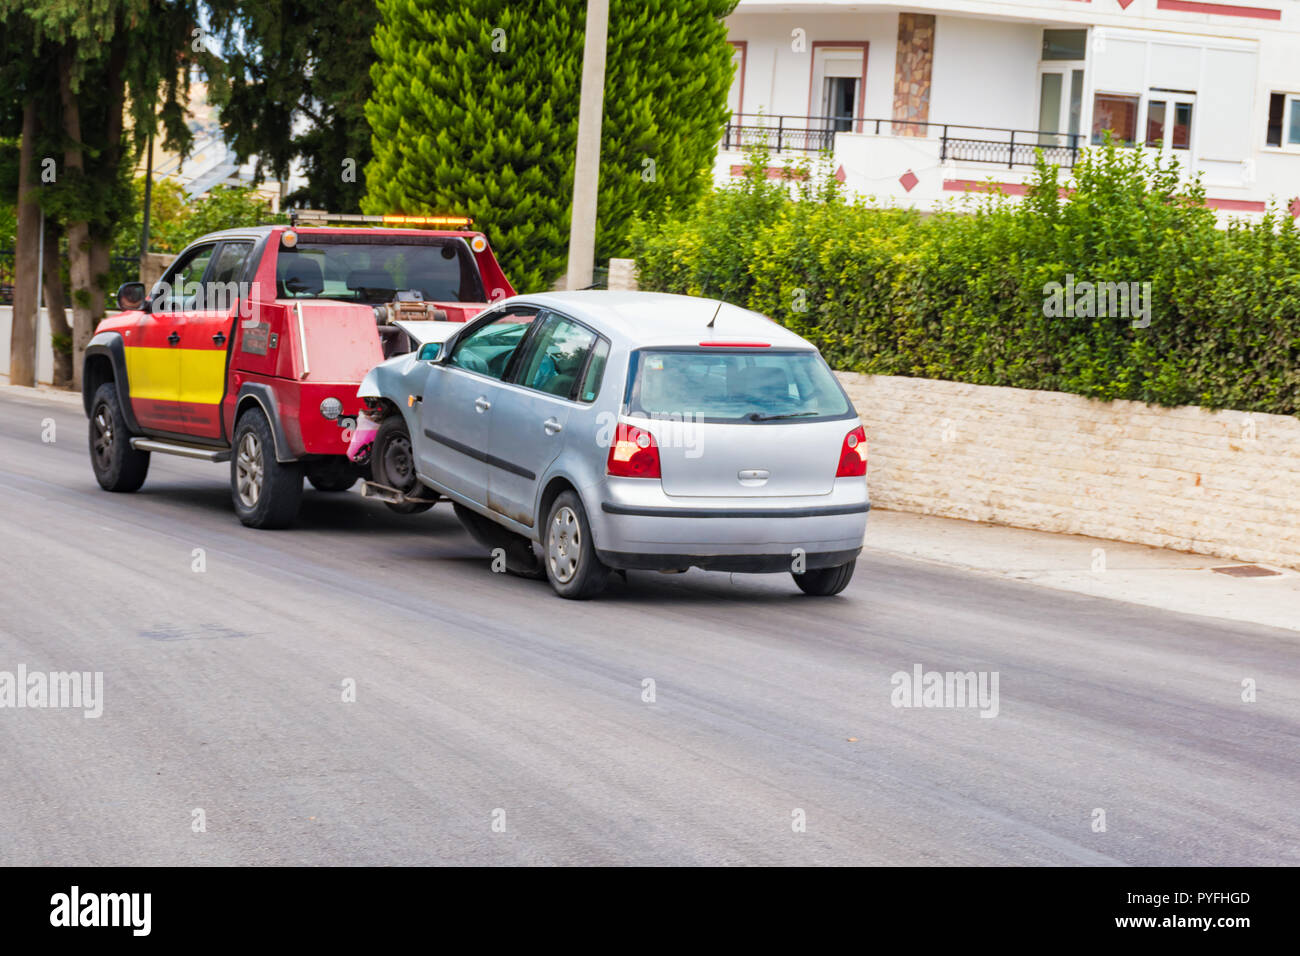 Crashed car being towed away by tow truck after accident Stock Photo